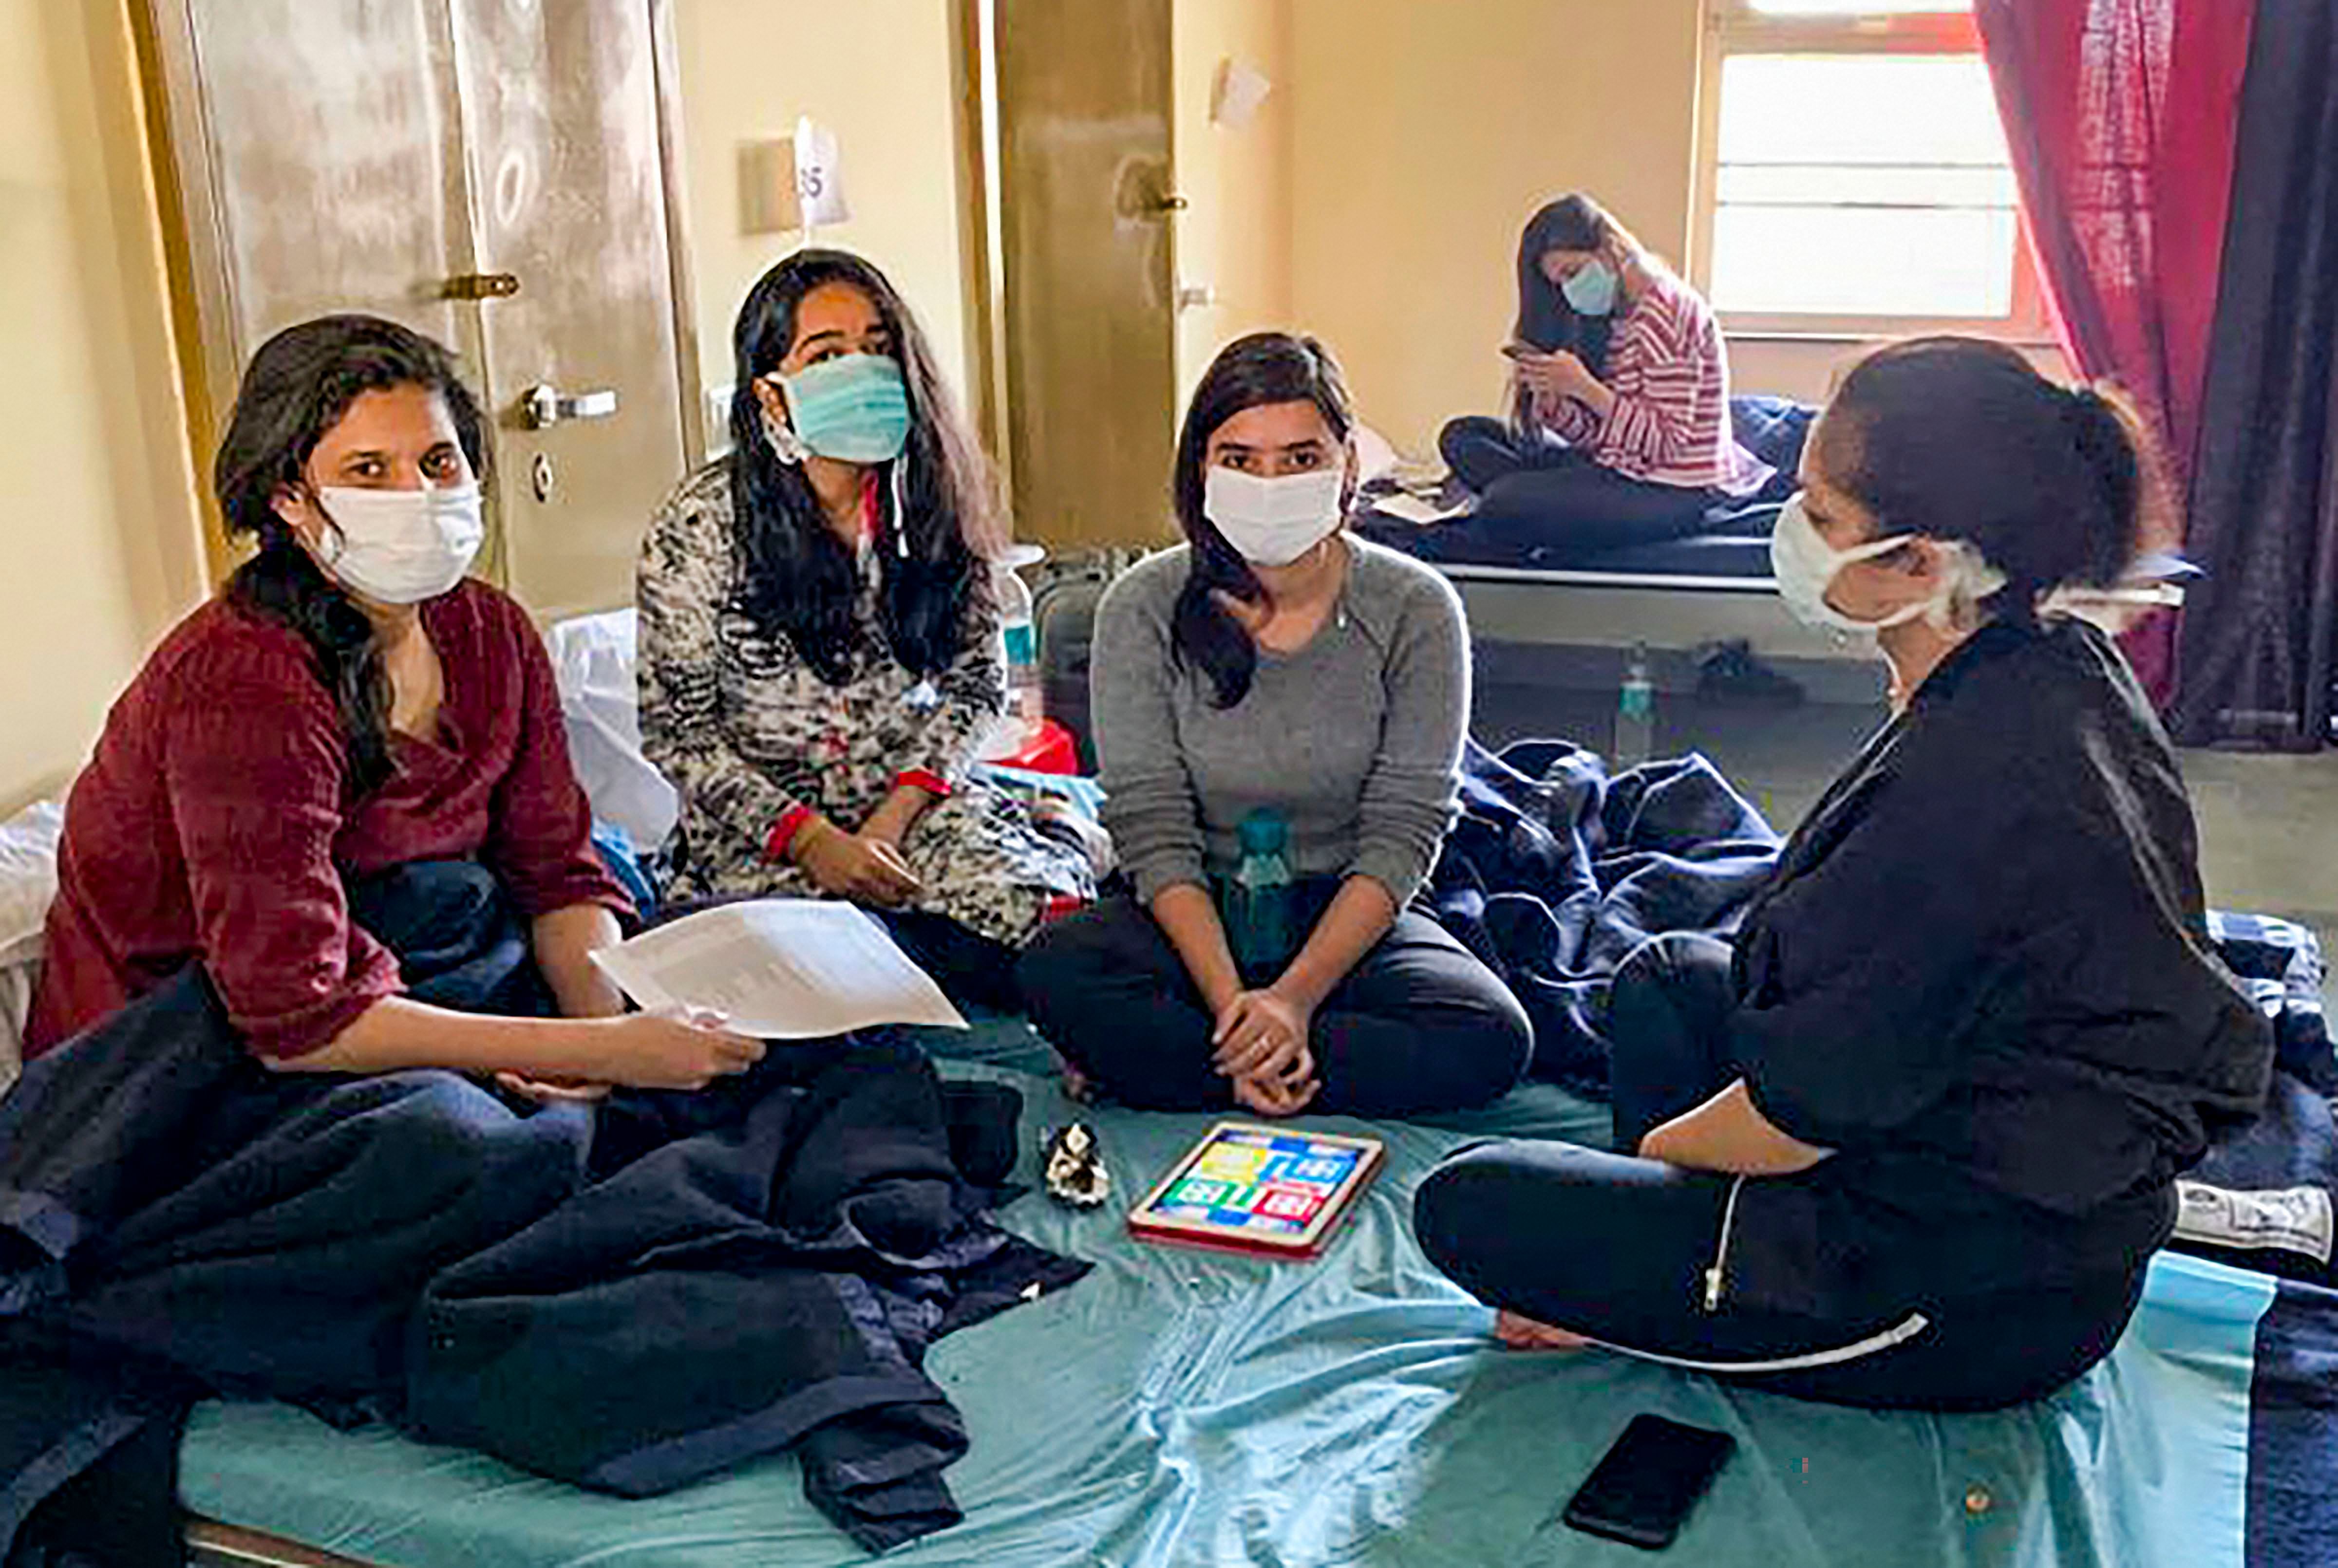 Indian nationals who were airlifted from coronavirus-hit Hubei province of China's Wuhan, at the ITBP's quarantine facility at Chhawla in New Delhi, Sunday, Feb. 16, 2020.  (Credit: PTI Photo)